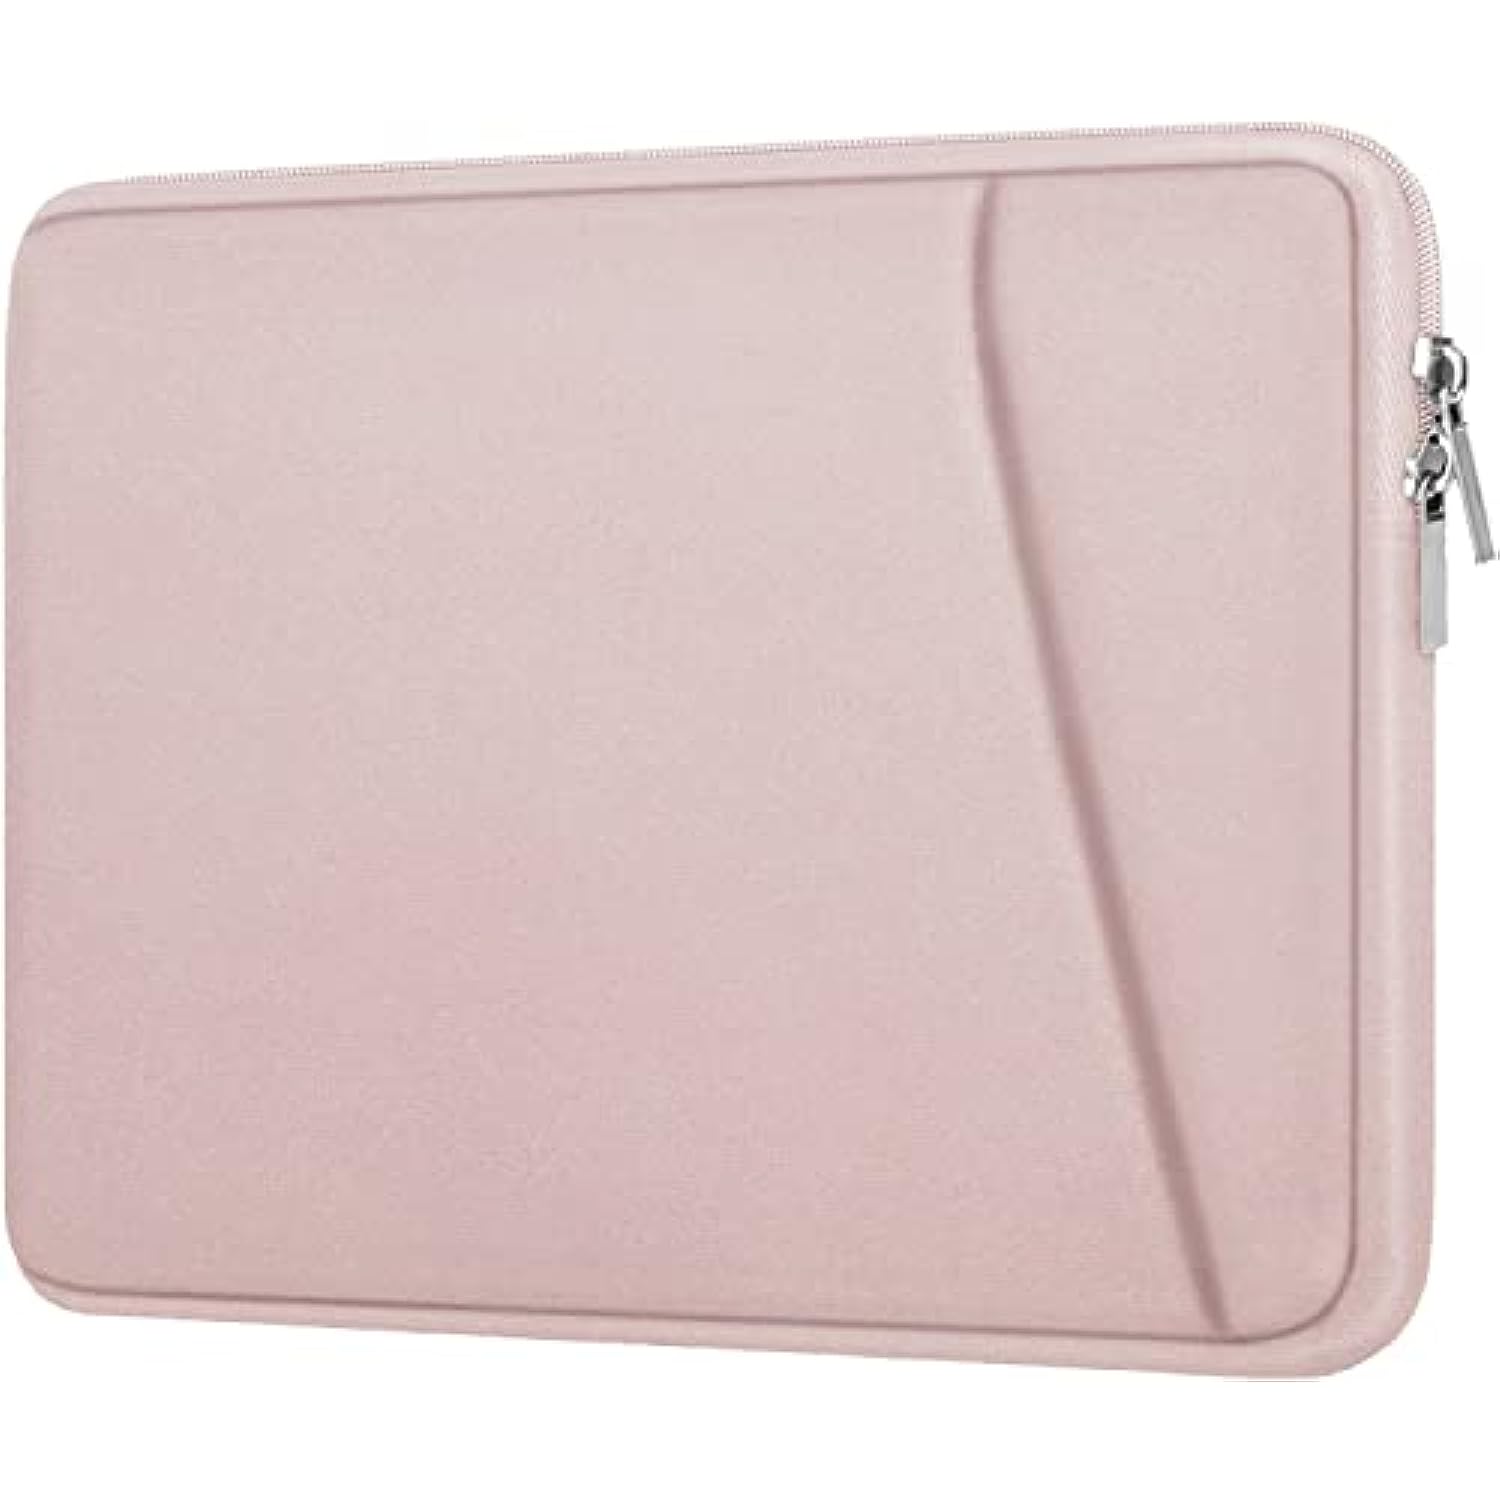 Shockproof Protective Sleeve Handbags for 13-15.6 inch Laptops